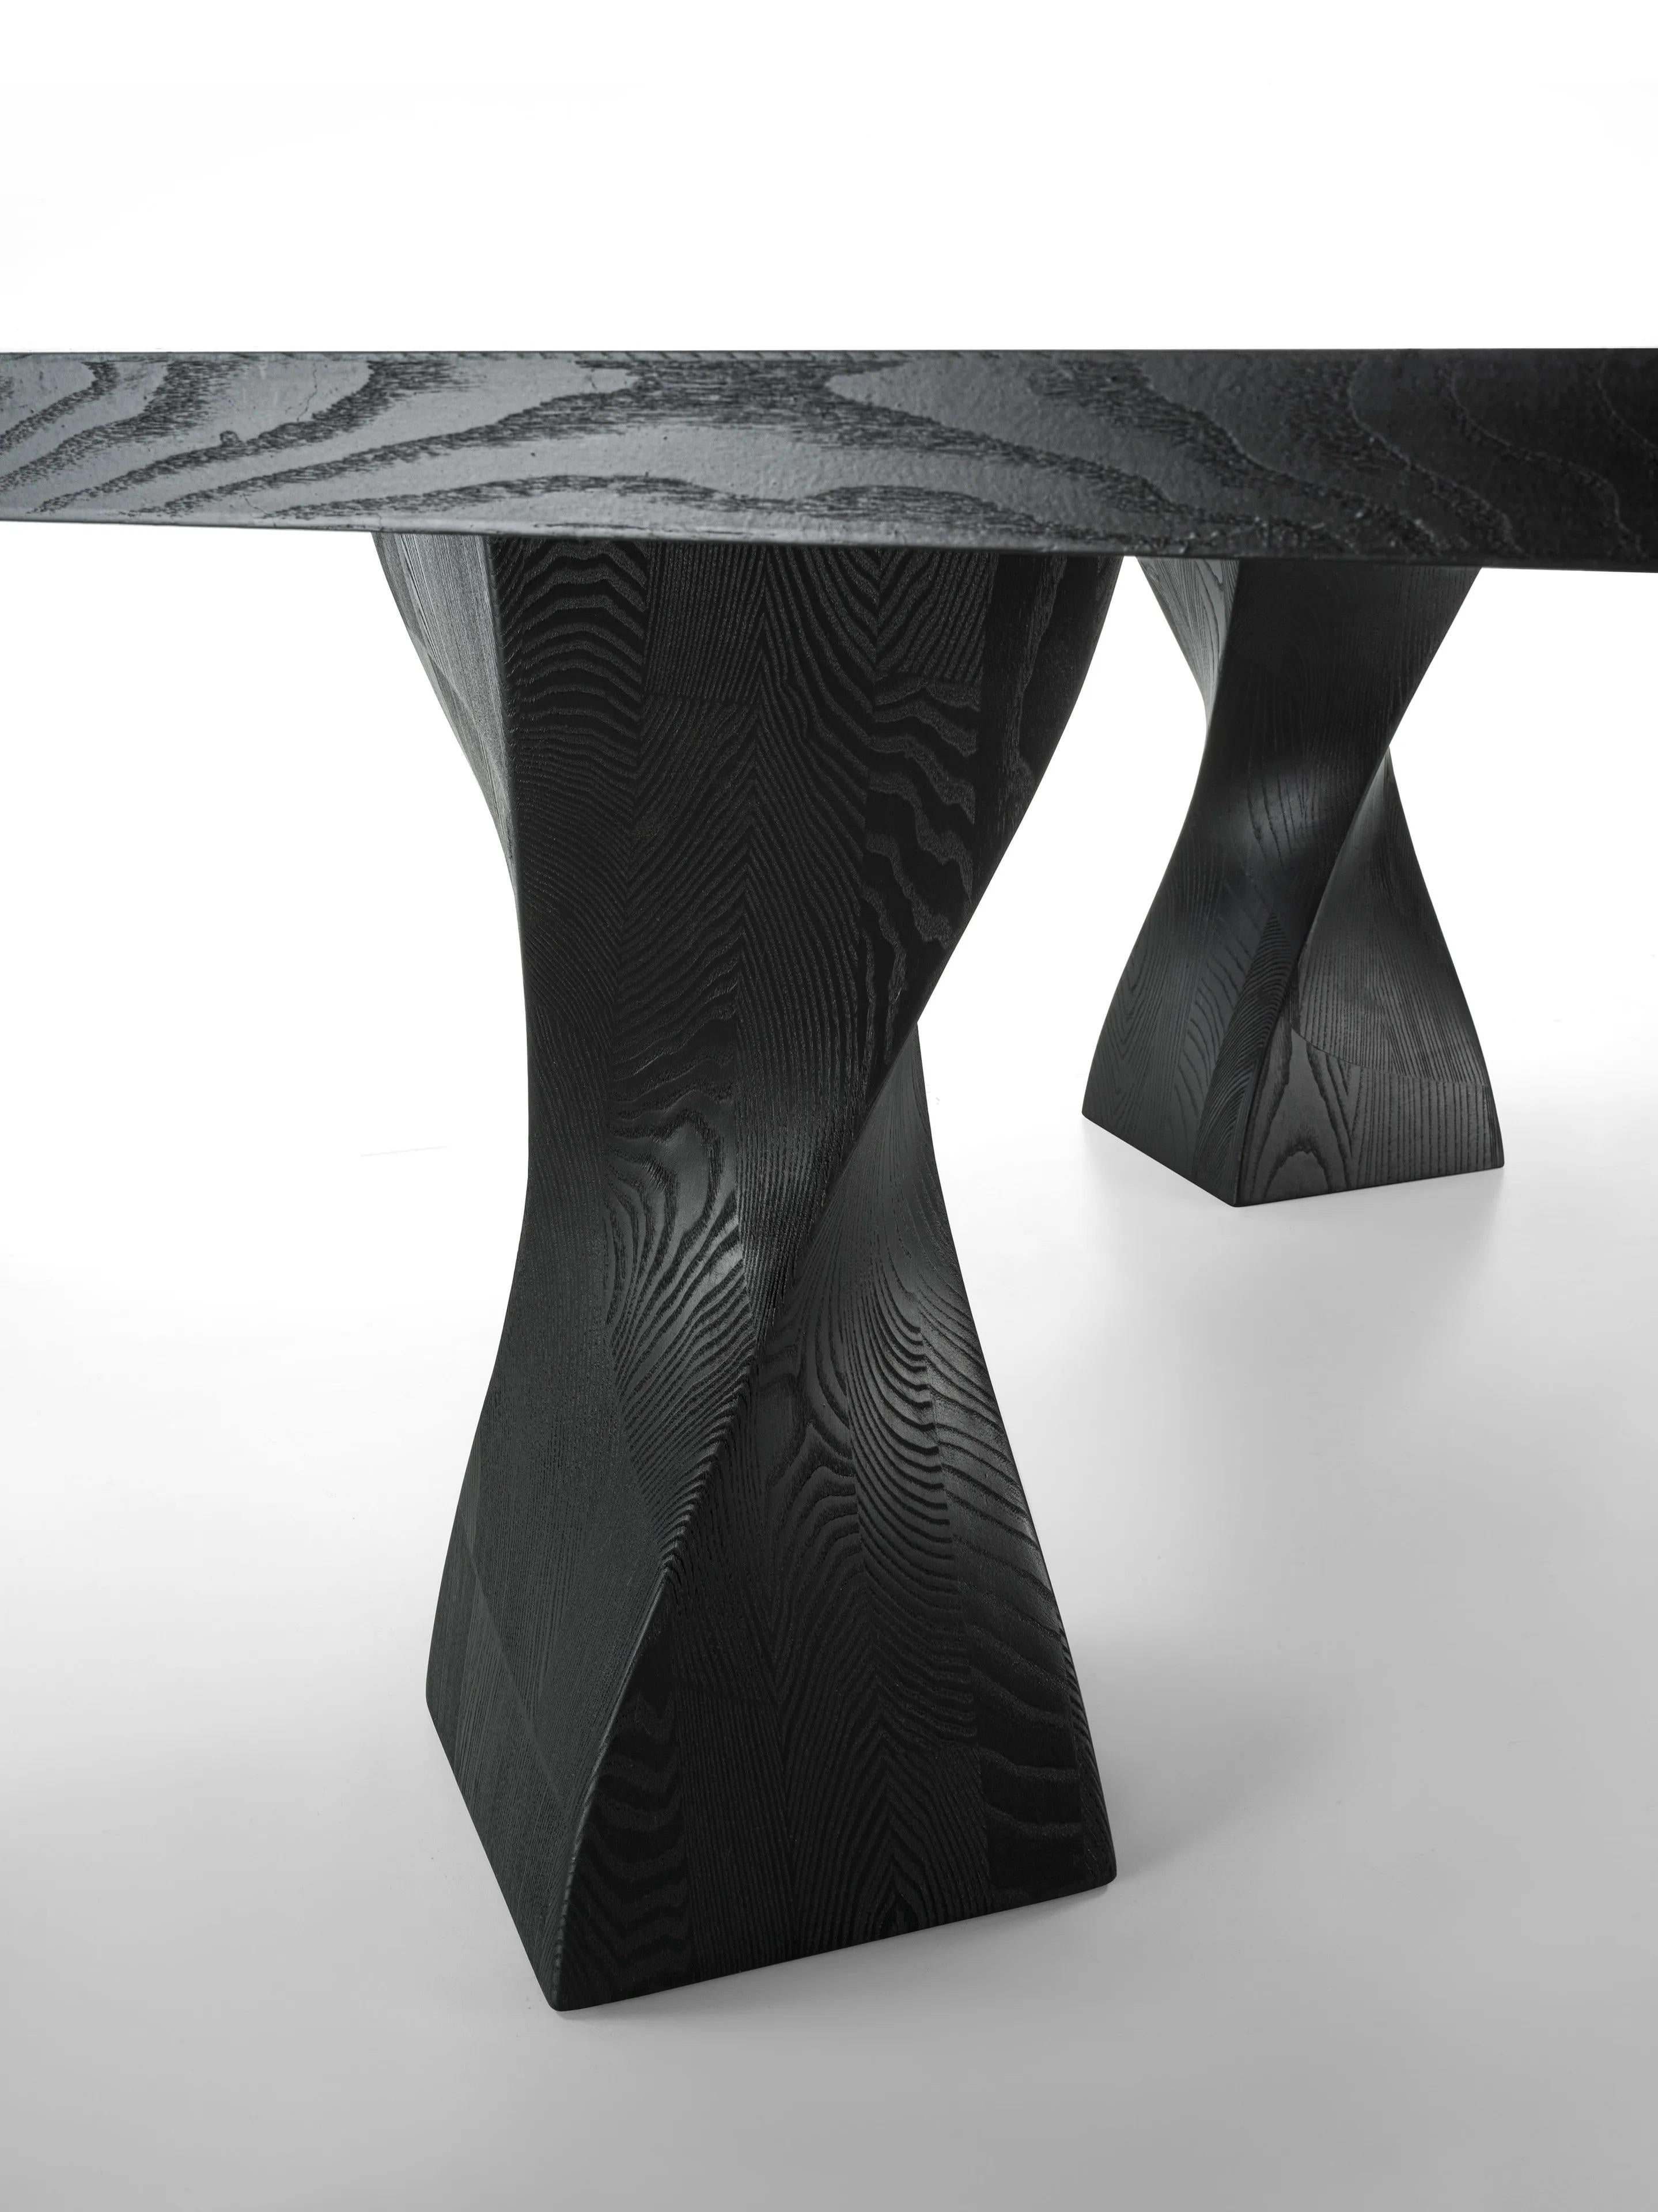 Modern Contemporary Dining Table Ft Beveled Edges And Twisted Legs For Sale